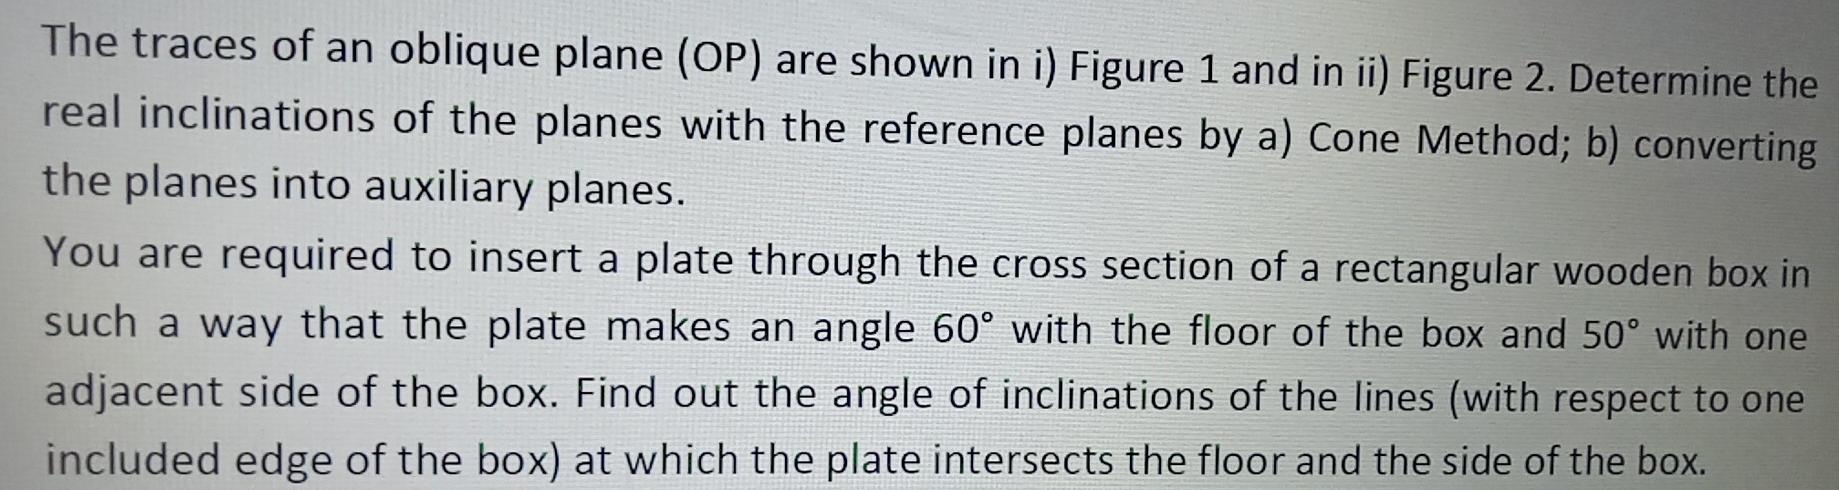 oblique planes in real life